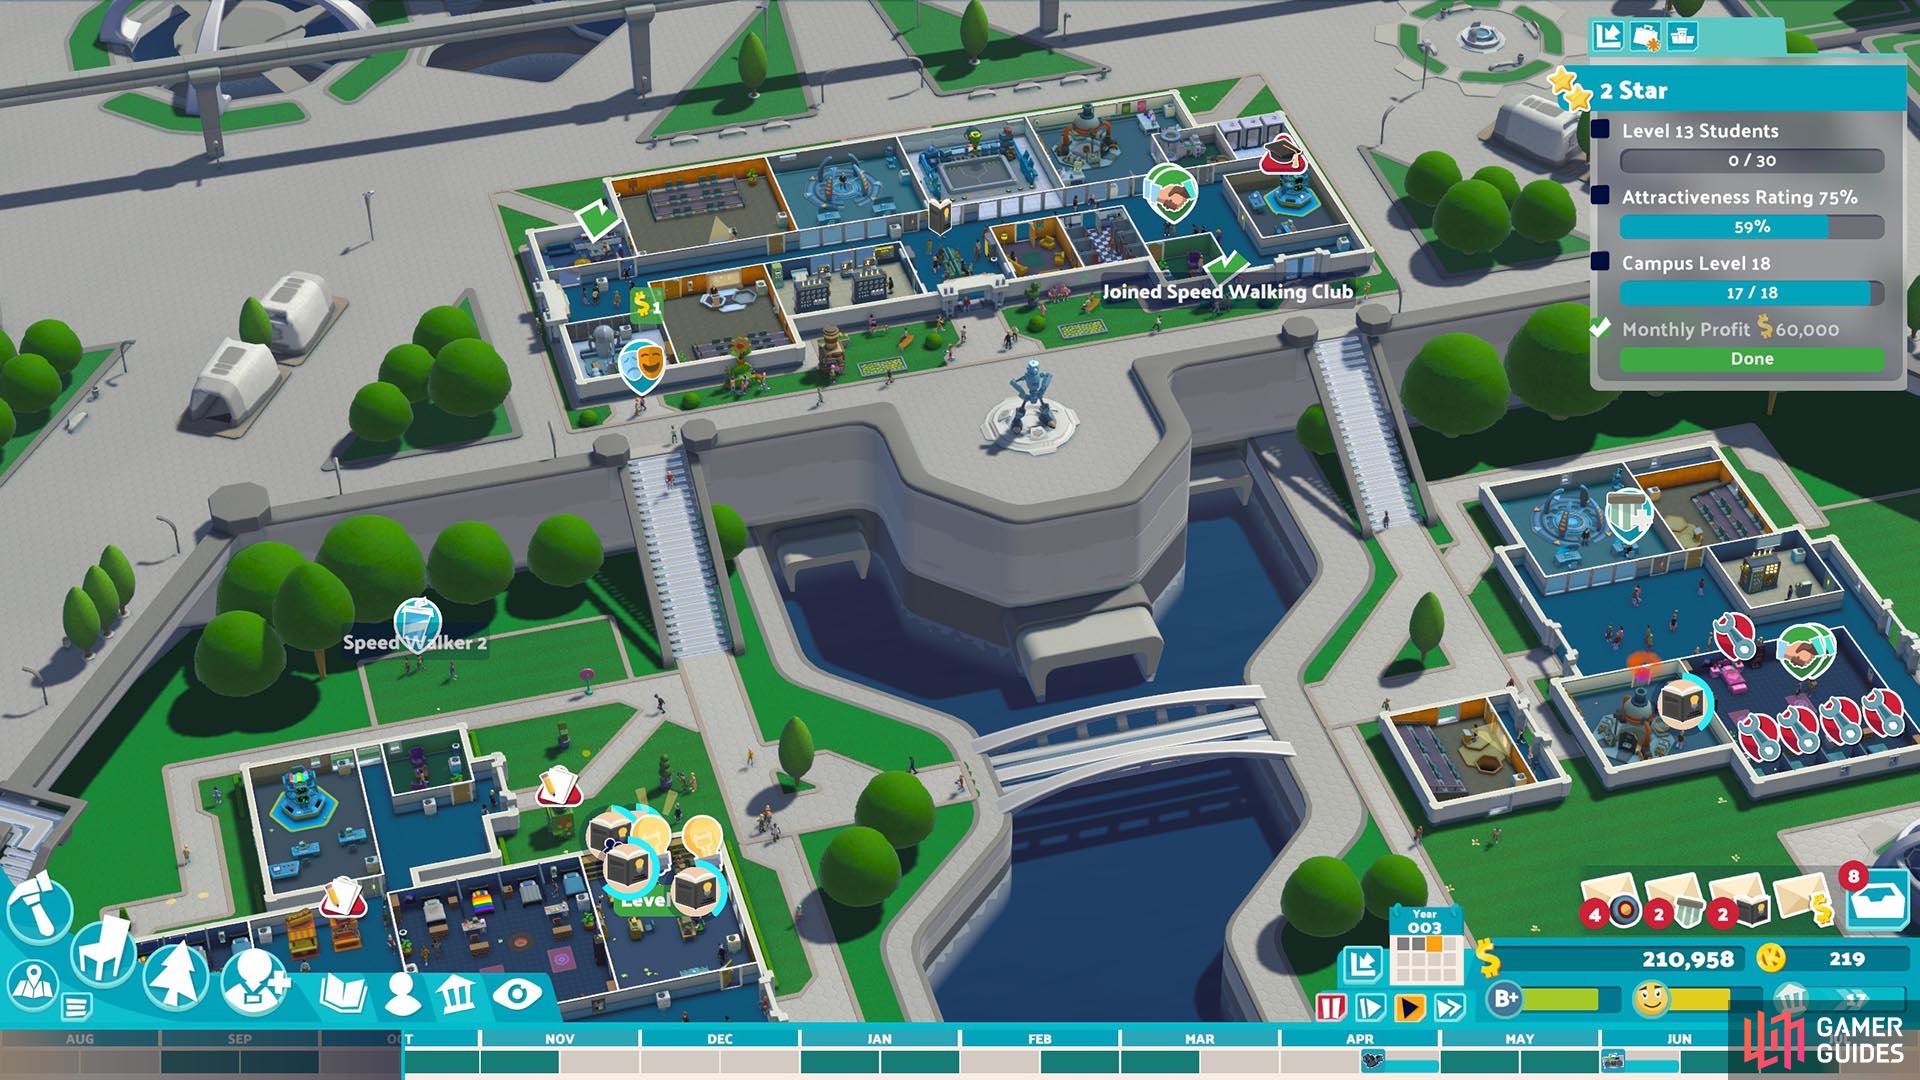 You will soon build a sprawling, futuristic campus to be proud of.